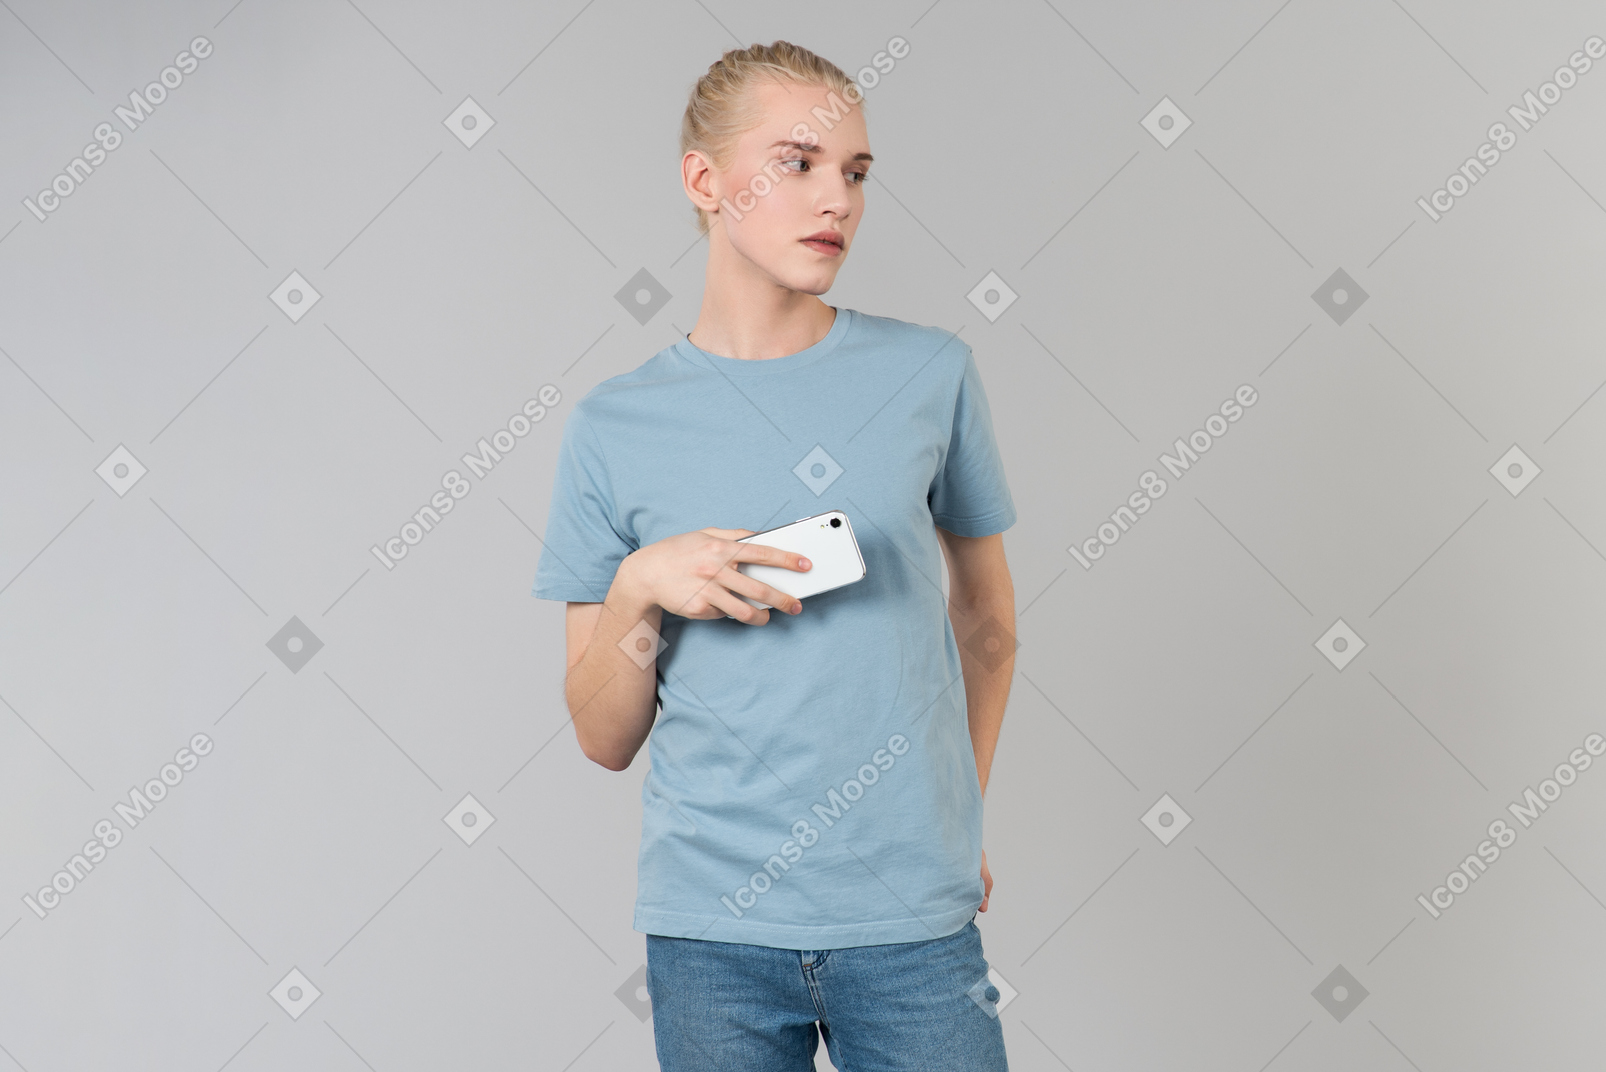 Dreamy young guy holding smartphone